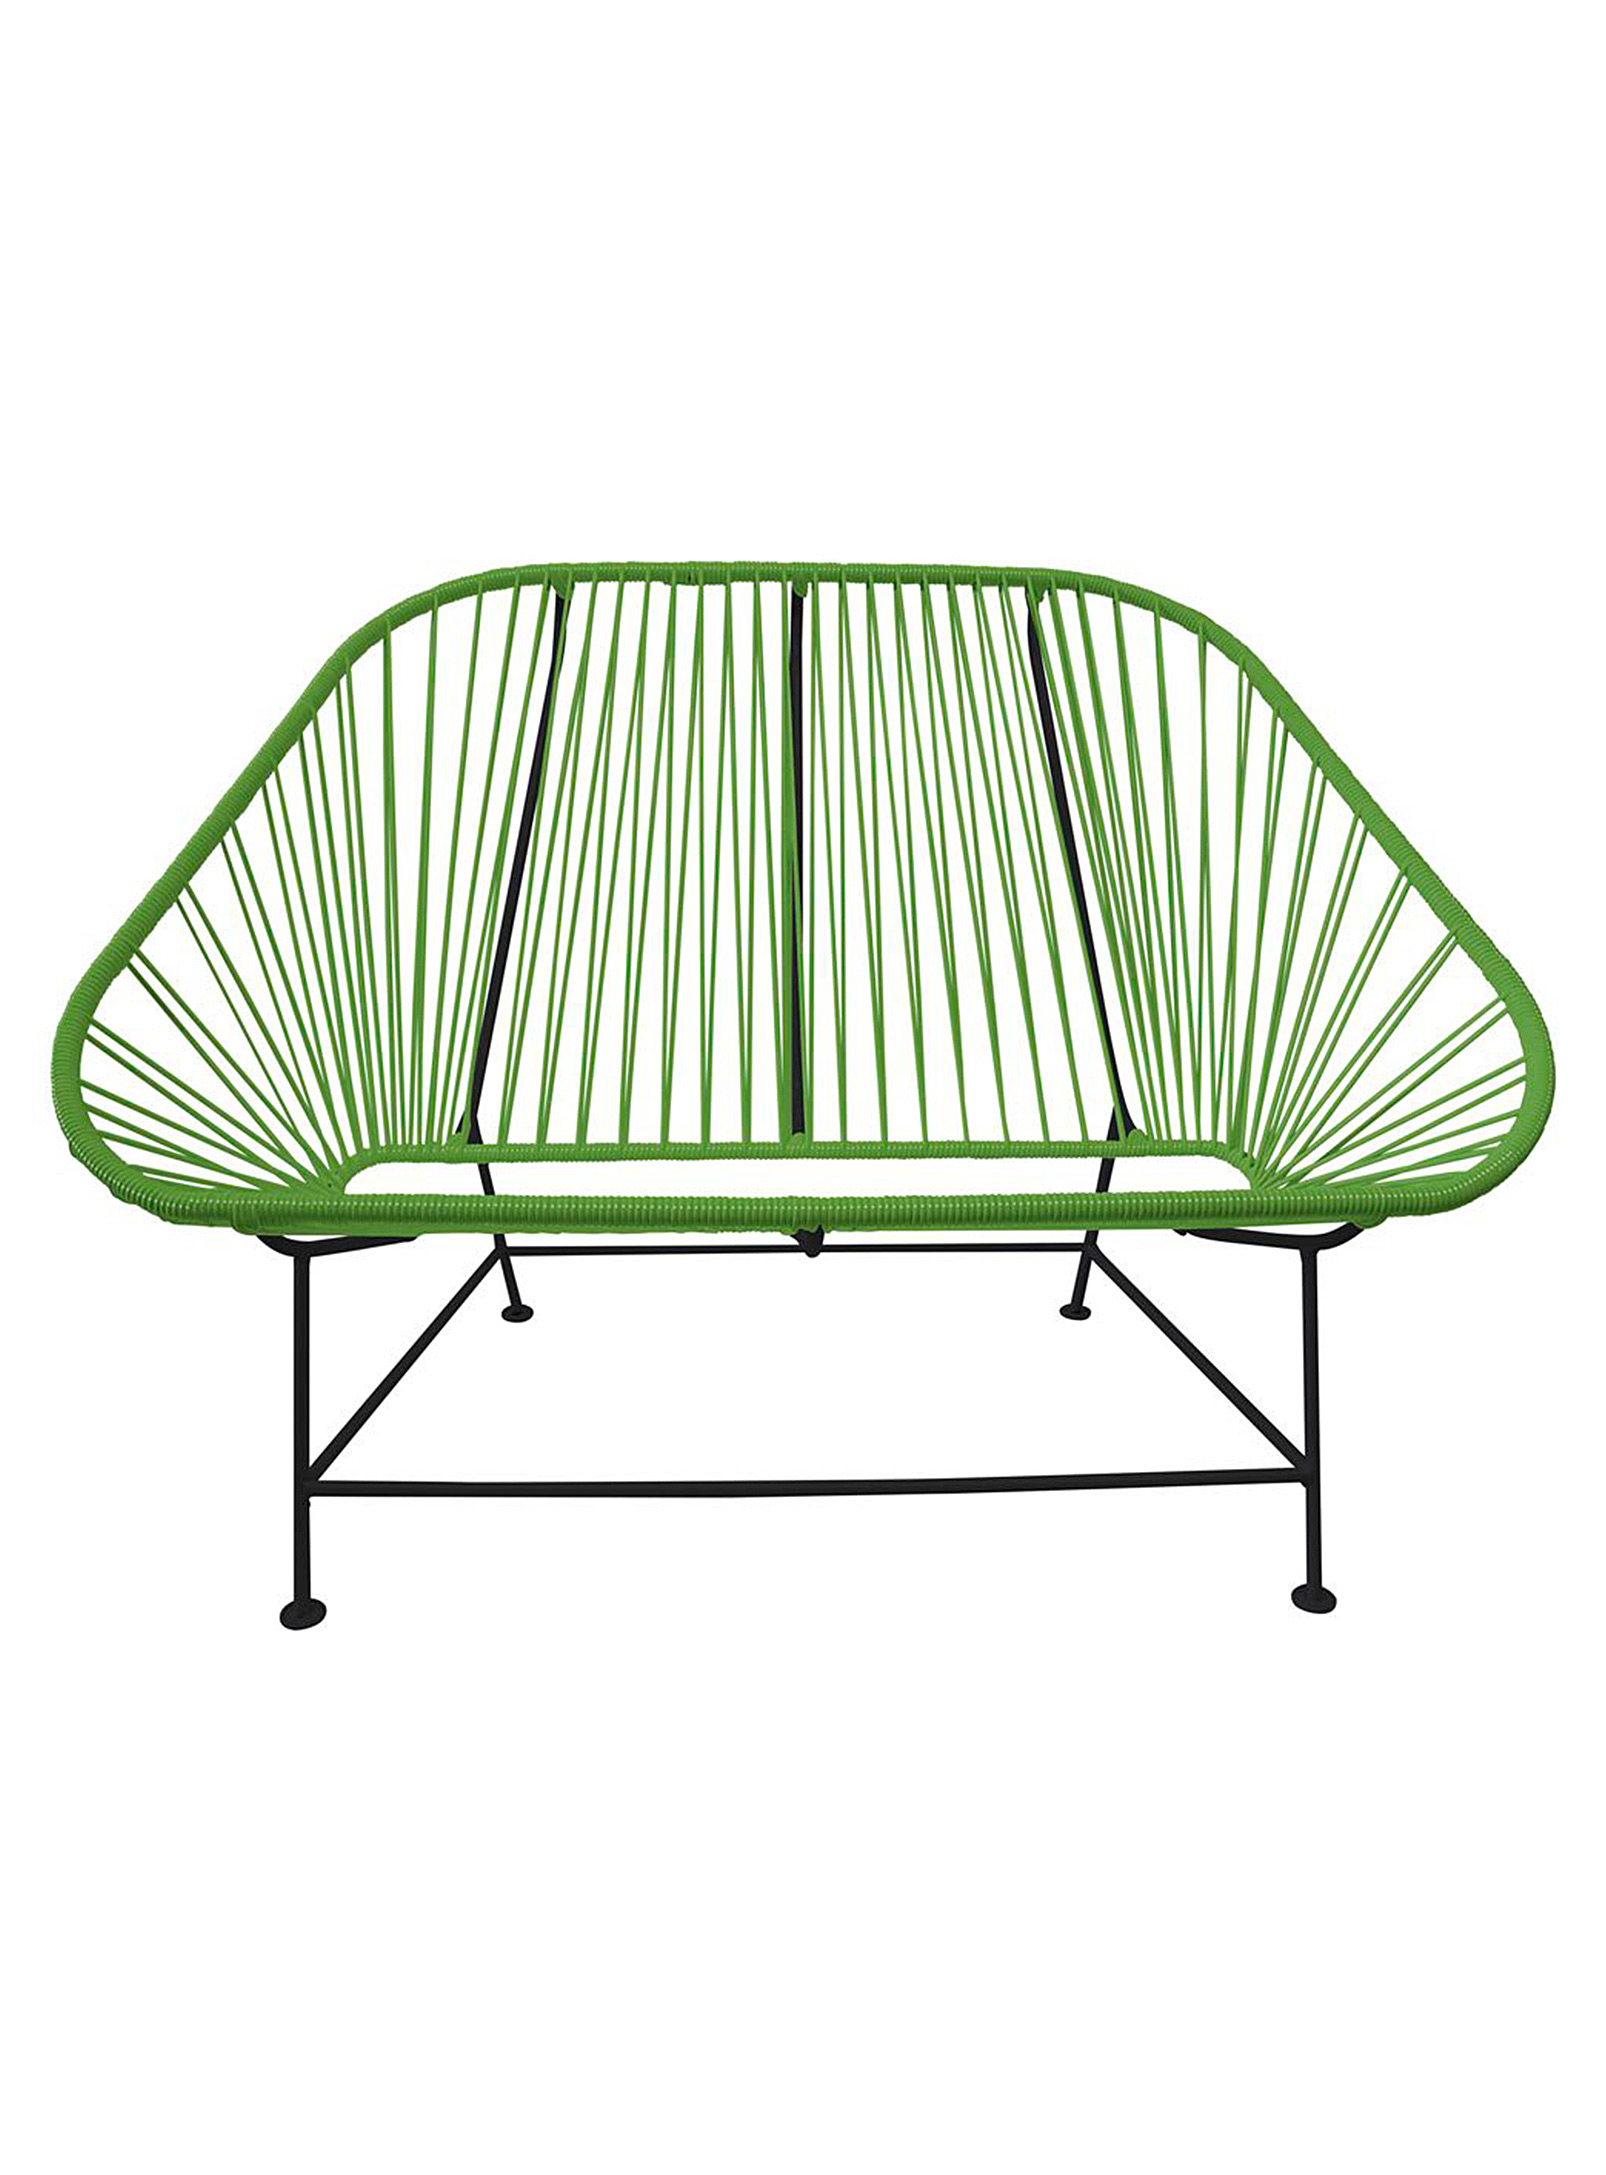 Simons Maison Inlove Outdoor Bench In Green